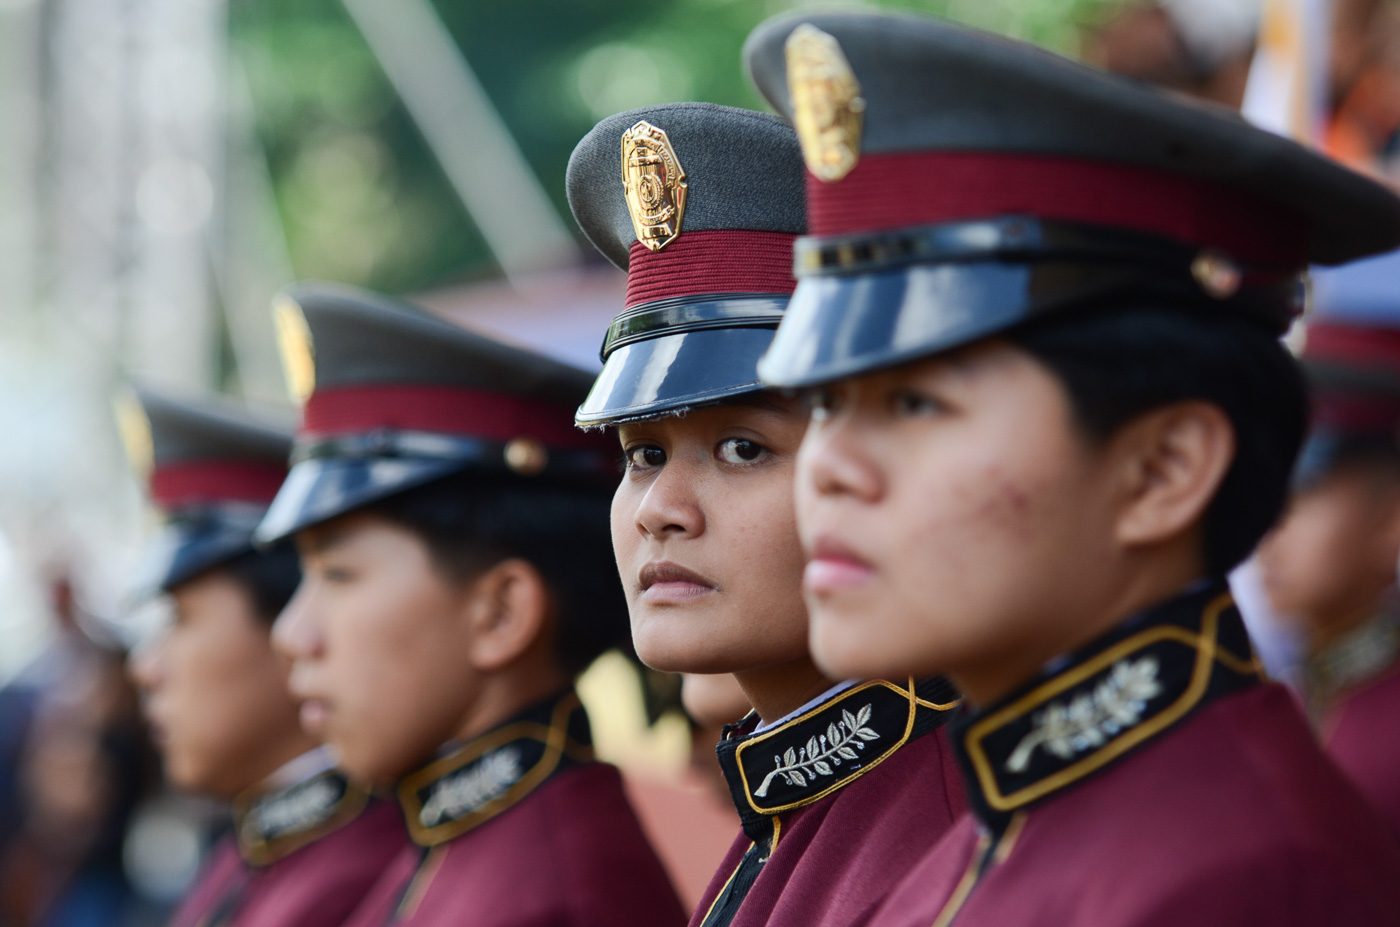 WOMEN POWER. Female cadets of the Academy. 